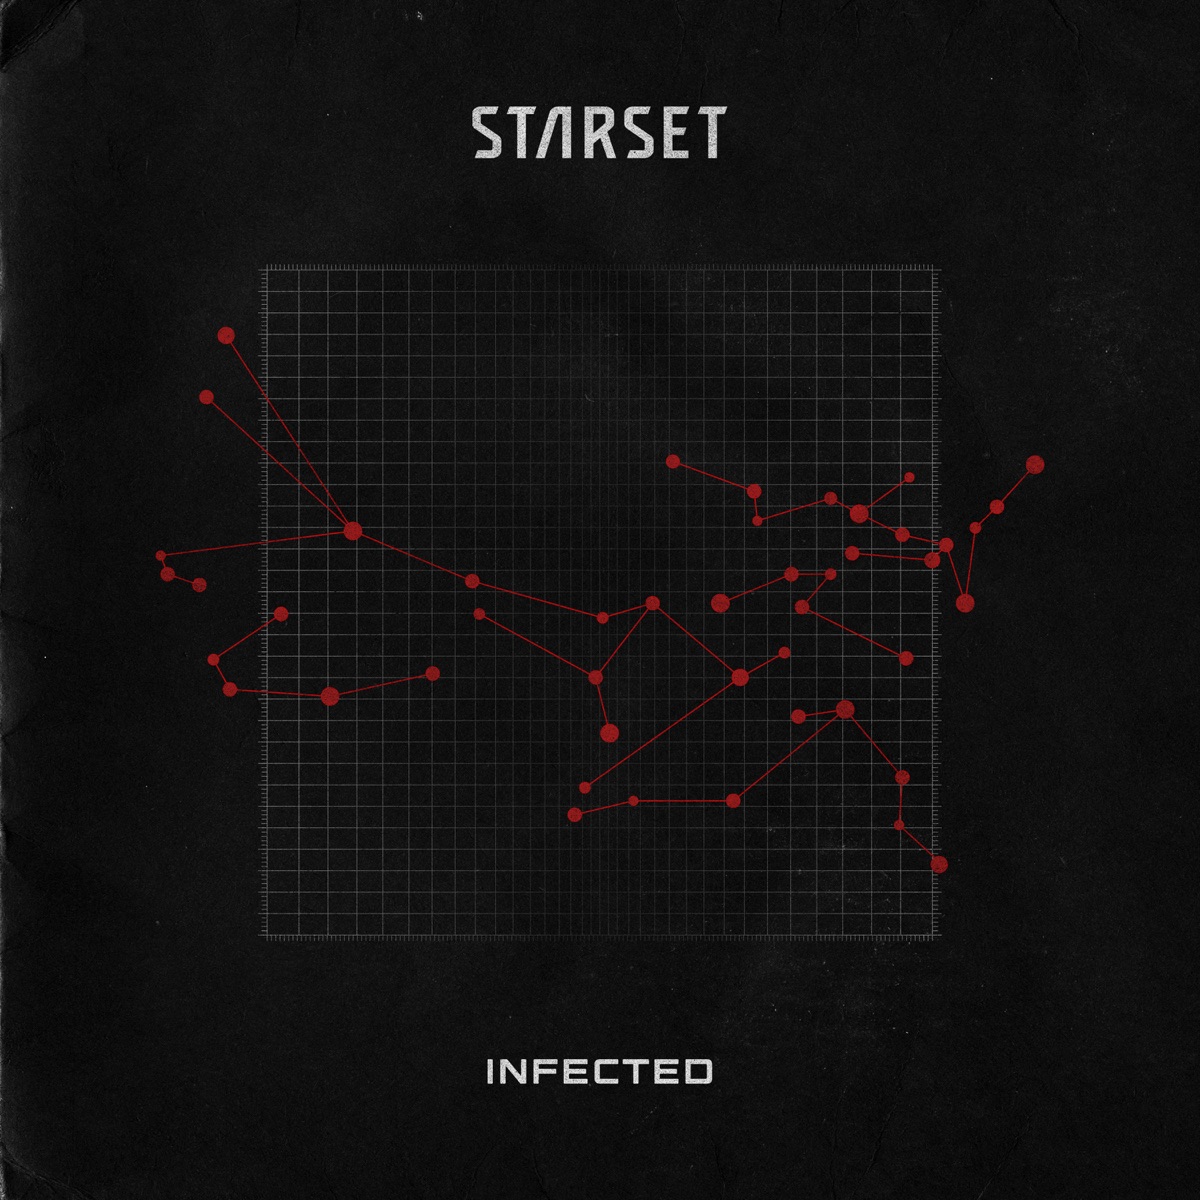 Cover art for『STARSET - INFECTED』from the release『INFECTED』